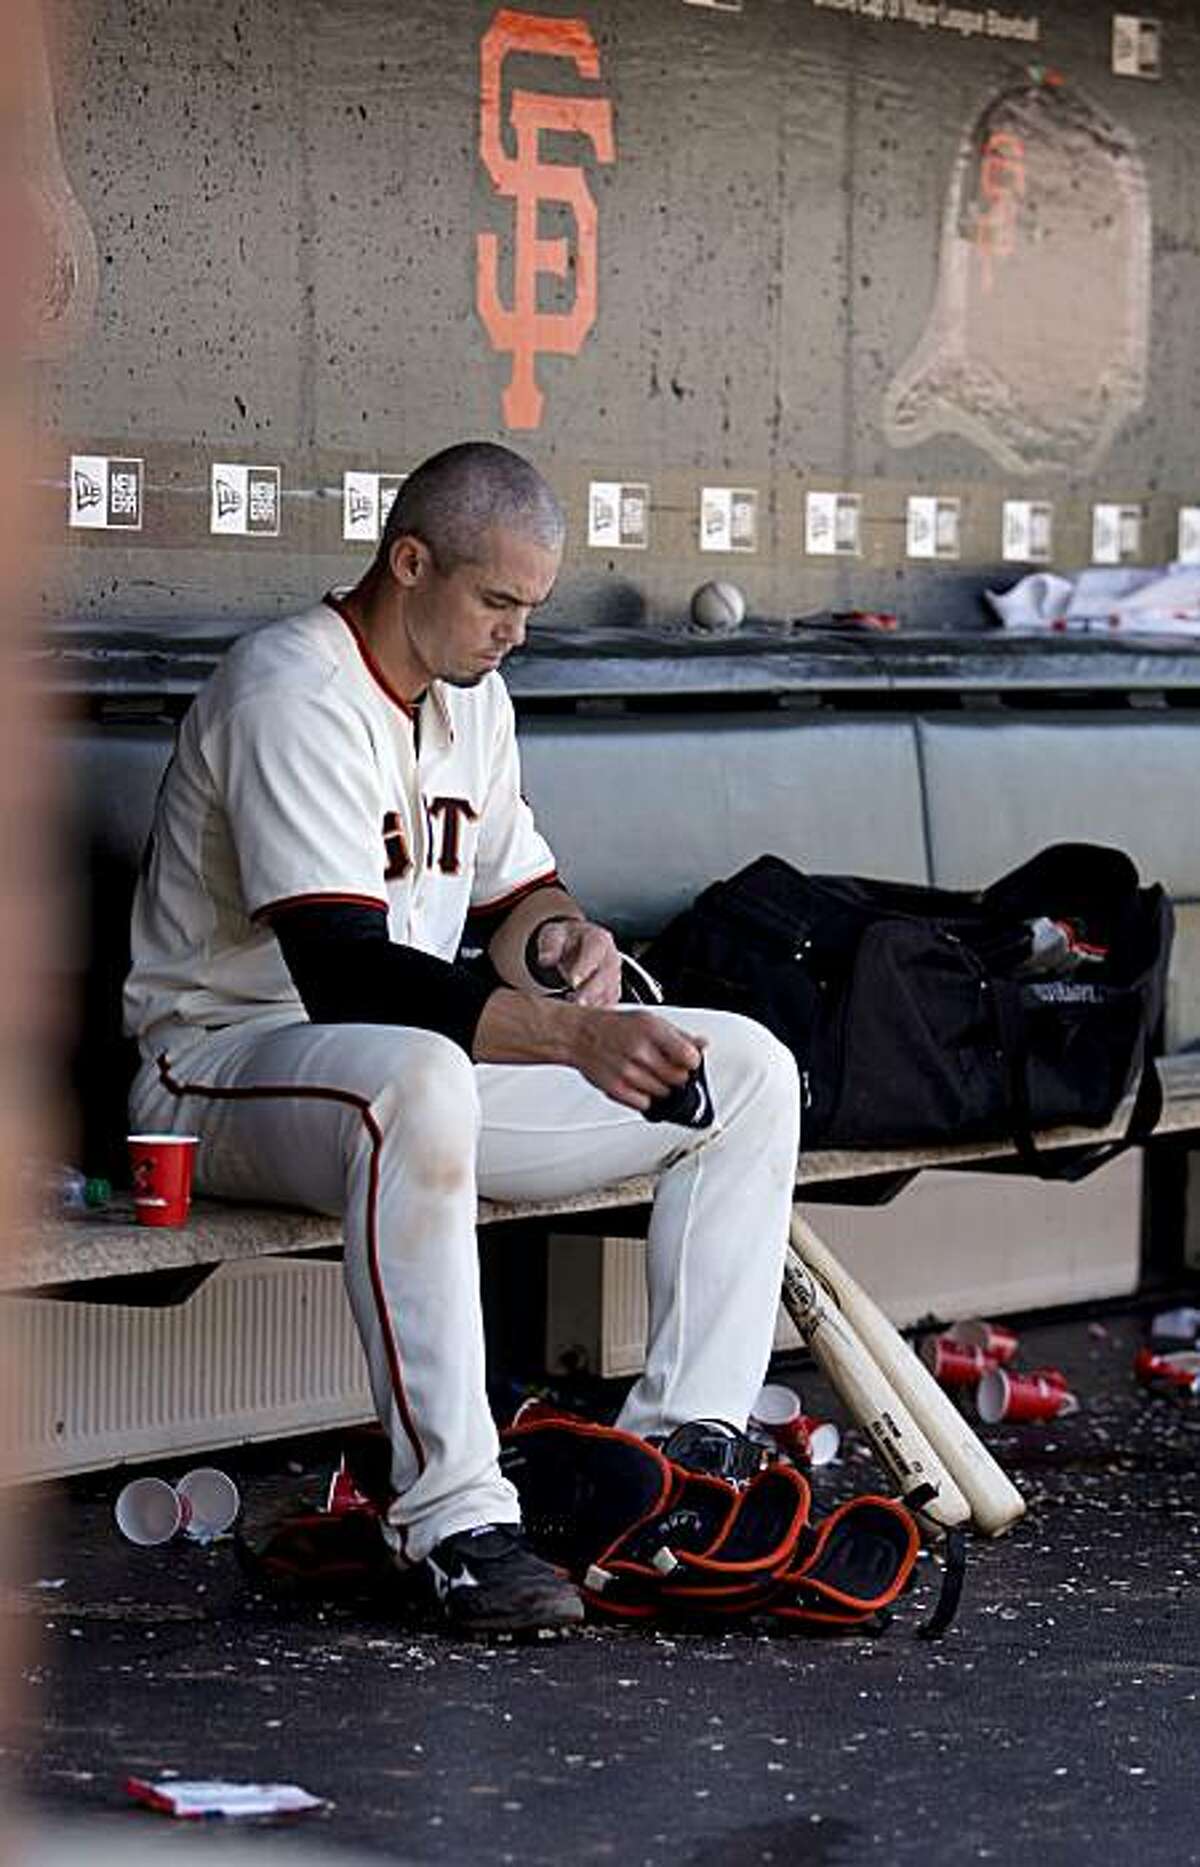 San Francisco Giants catcher Eli Whiteside packs up his gear after a loss to Los Angeles Dodgers in San Francisco on Wednesday.